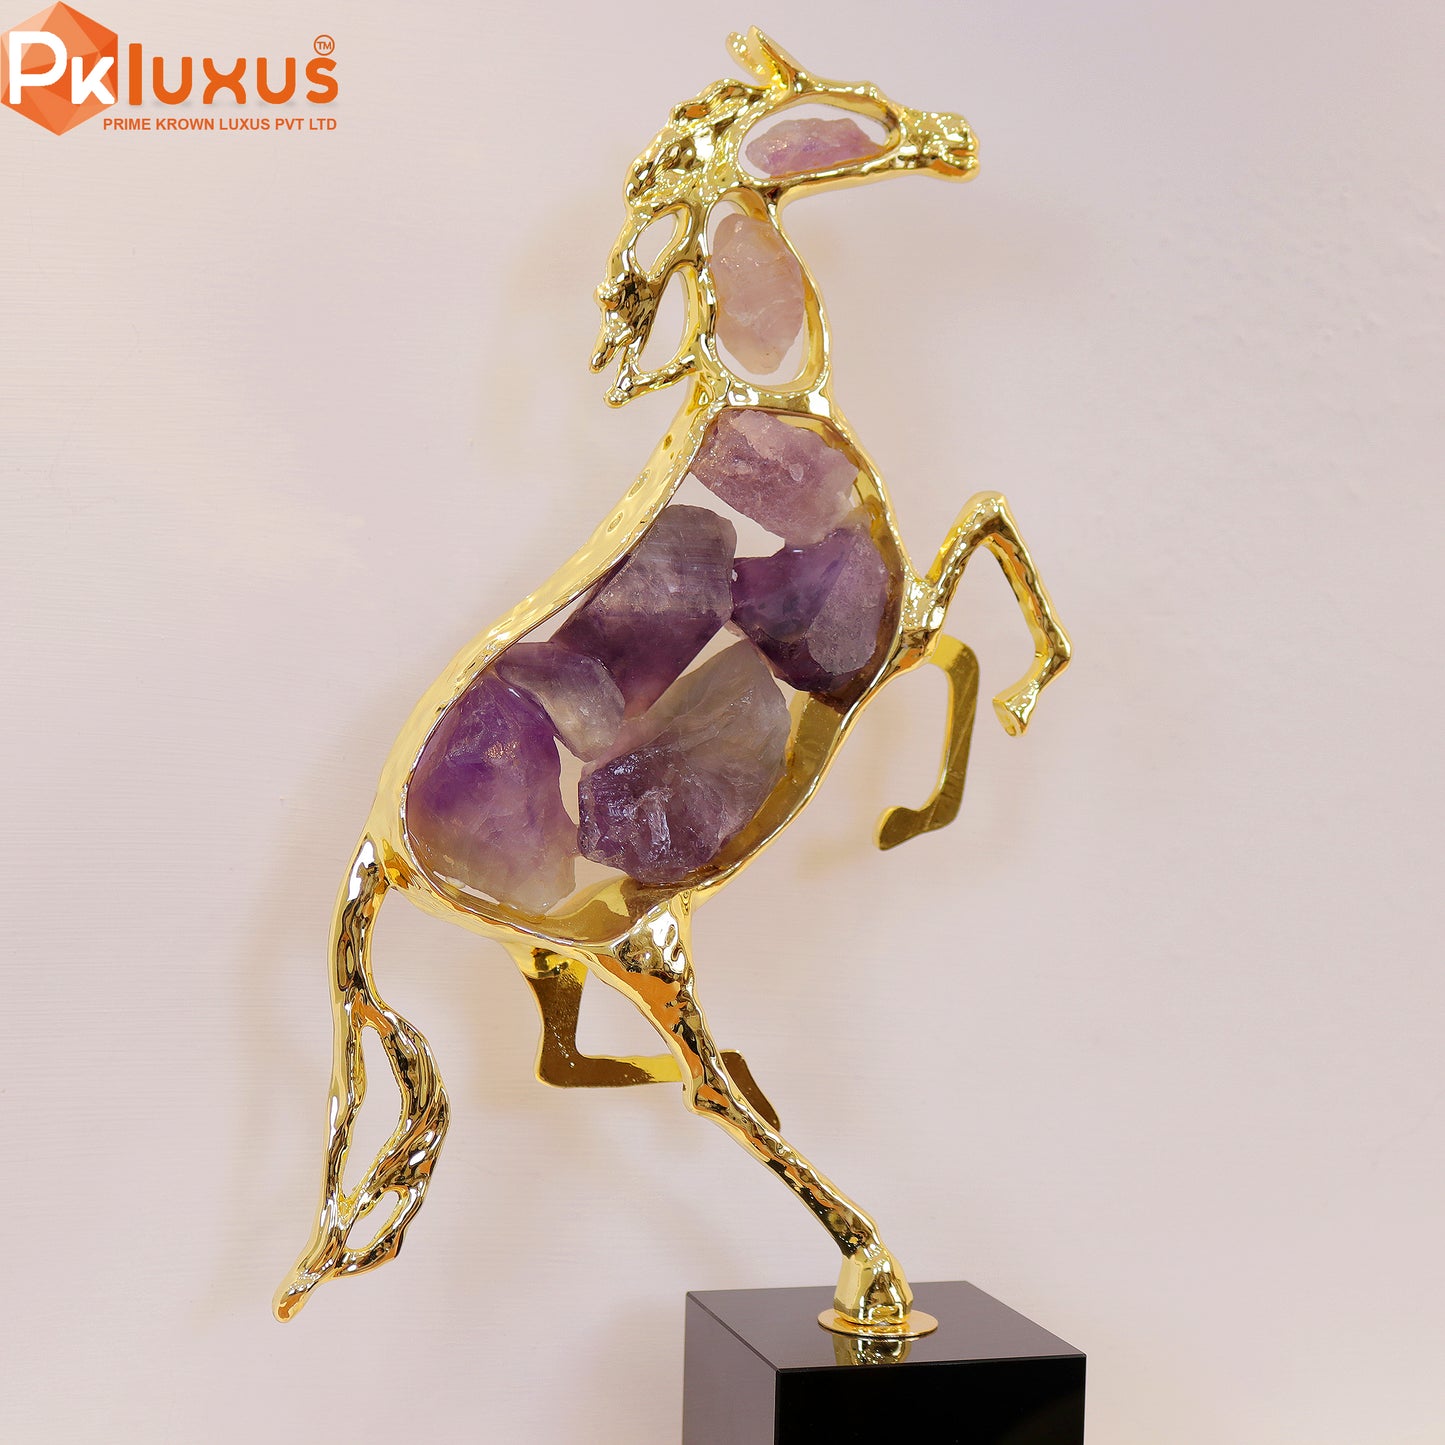 Luxury Gold Inlay Natural Glazed Stone Horse Statue By PK LUXUS™ - PK LUXUS